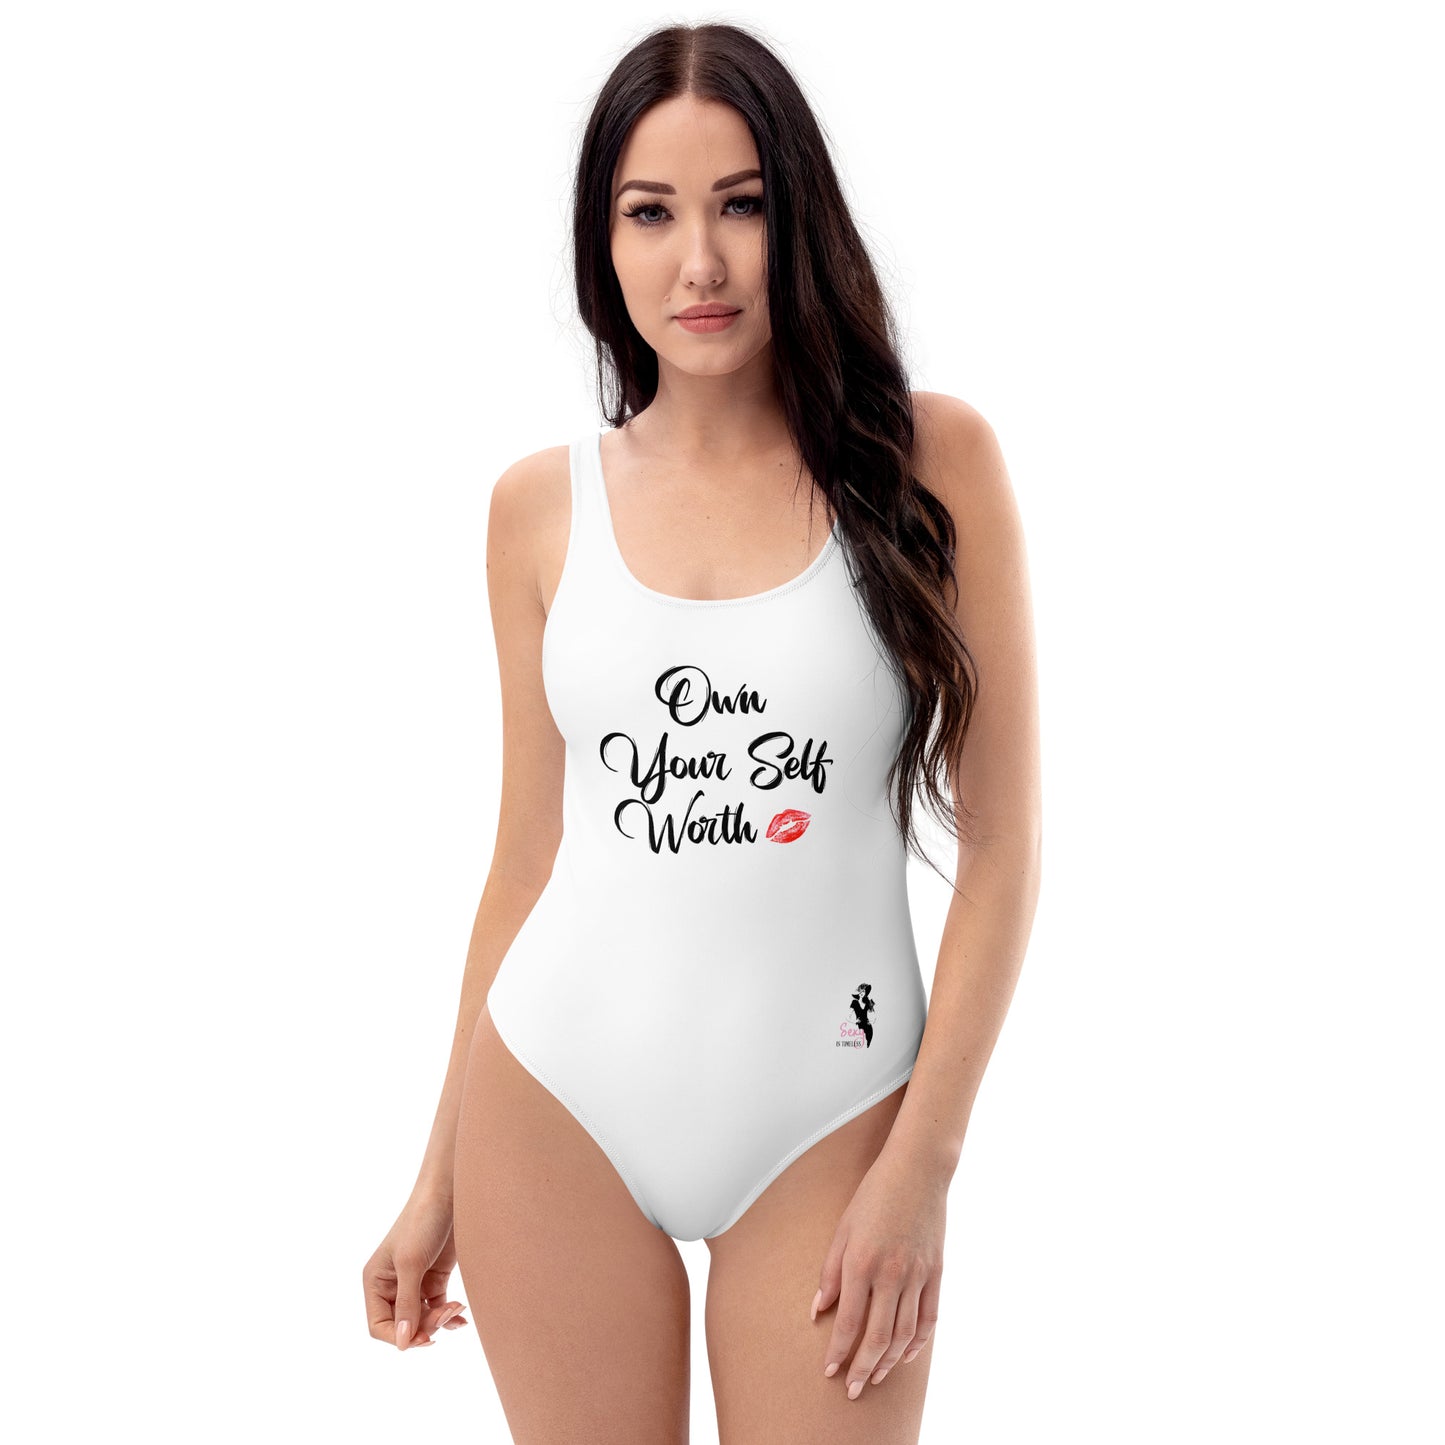 One-Piece Swimsuit - Own your self worth